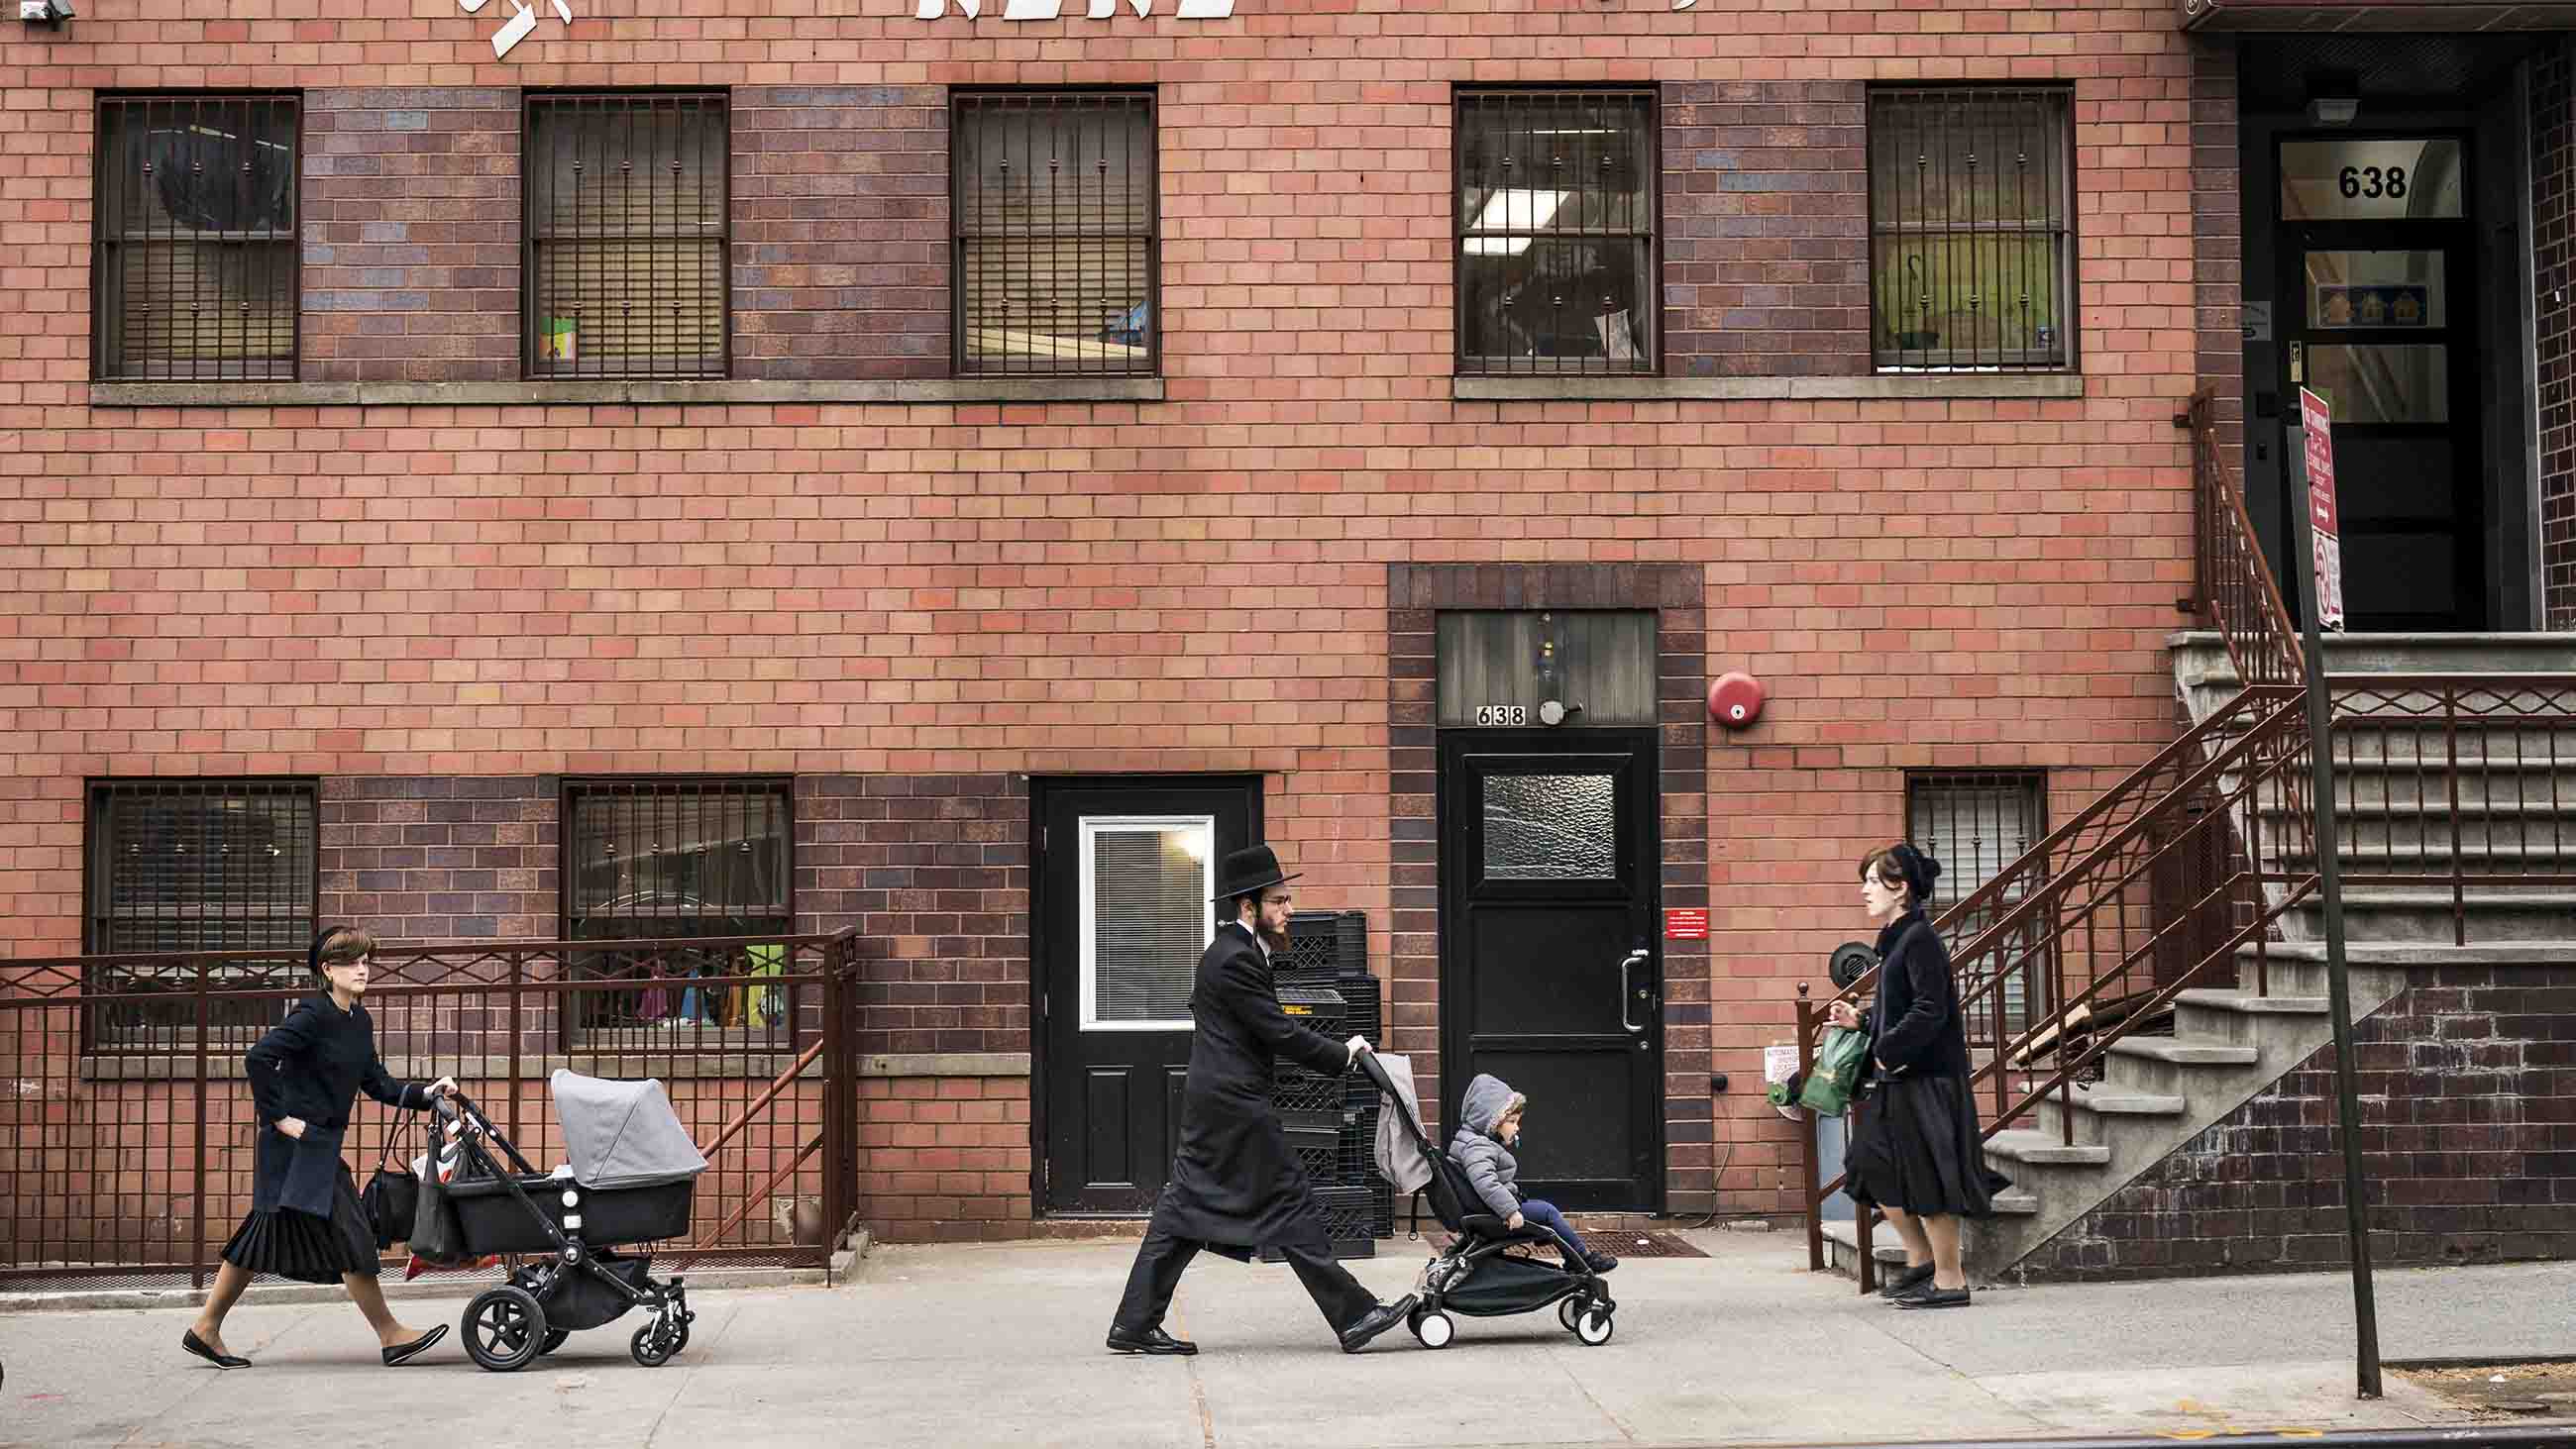 Since a measles outbreak began last fall, Brooklyn's Williamsburg neighborhood has seen more than 250 cases of the illness, mostly among the area's ultra-Orthodox Jewish community.